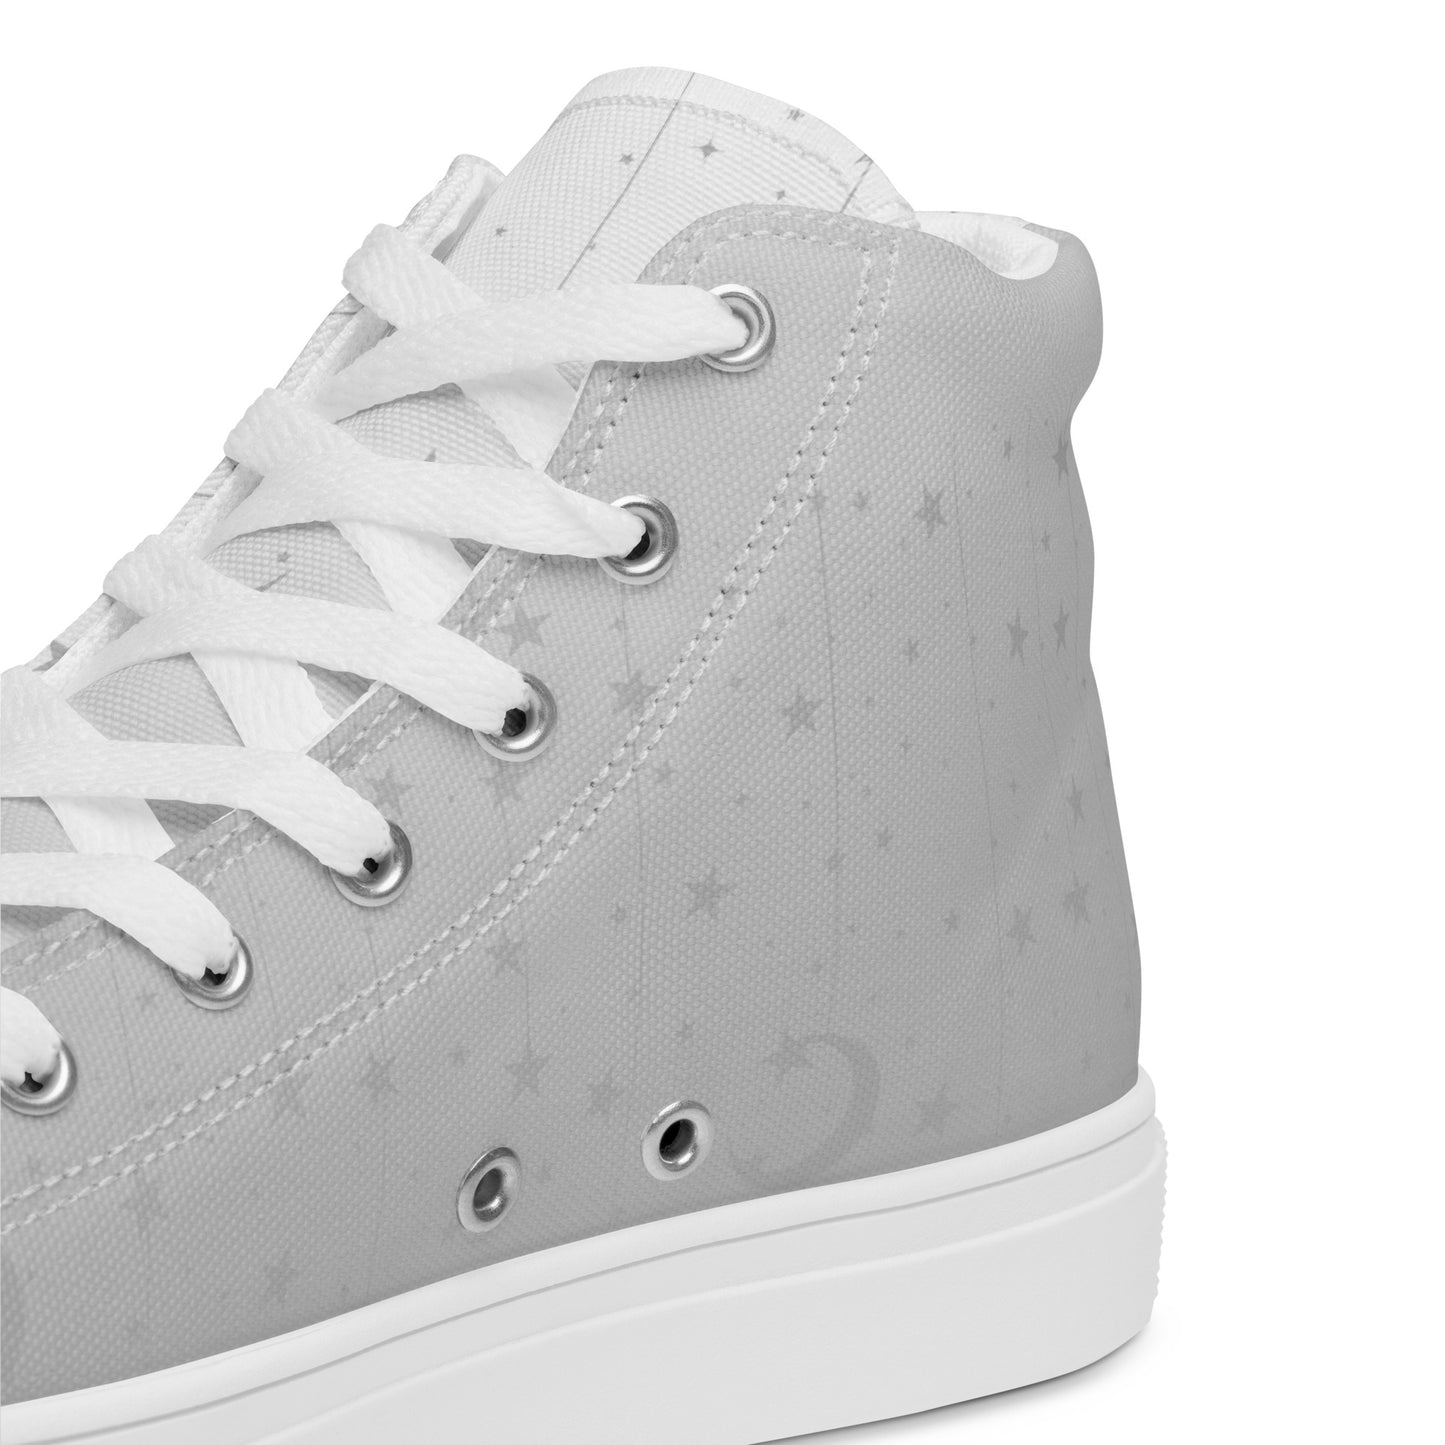 Silver Grey Moon Star Women’s High Top Canvas Shoes